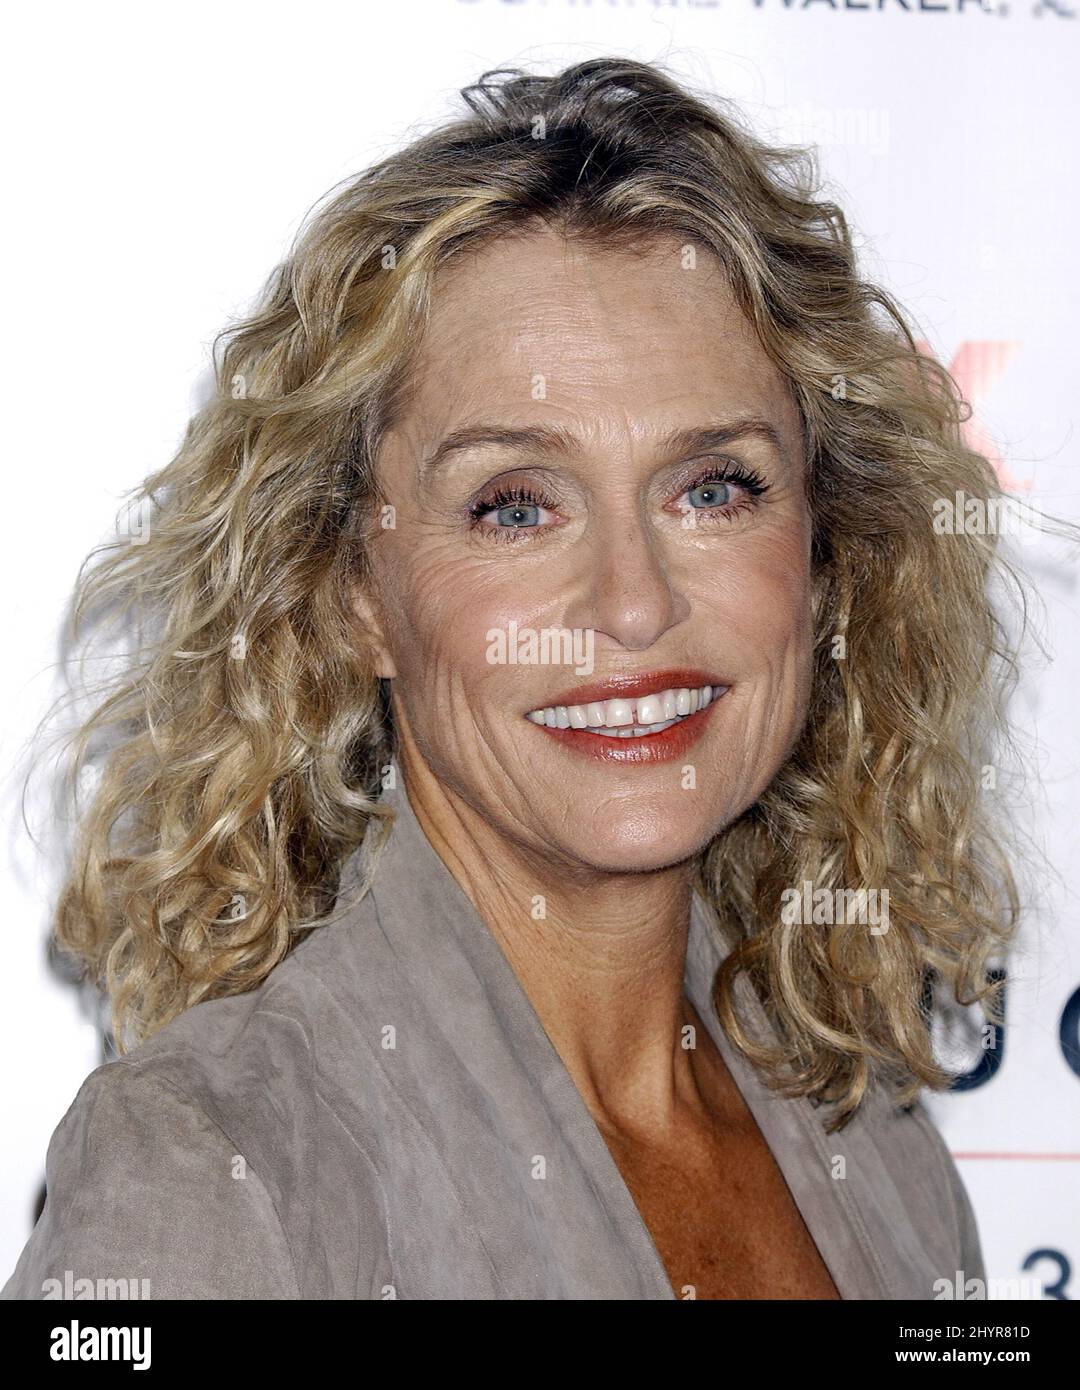 Lauren Hutton attends the Nip/Tuck Season Five Premiere Screening held at the Paramount Theatre in Hollywood. Stock Photo